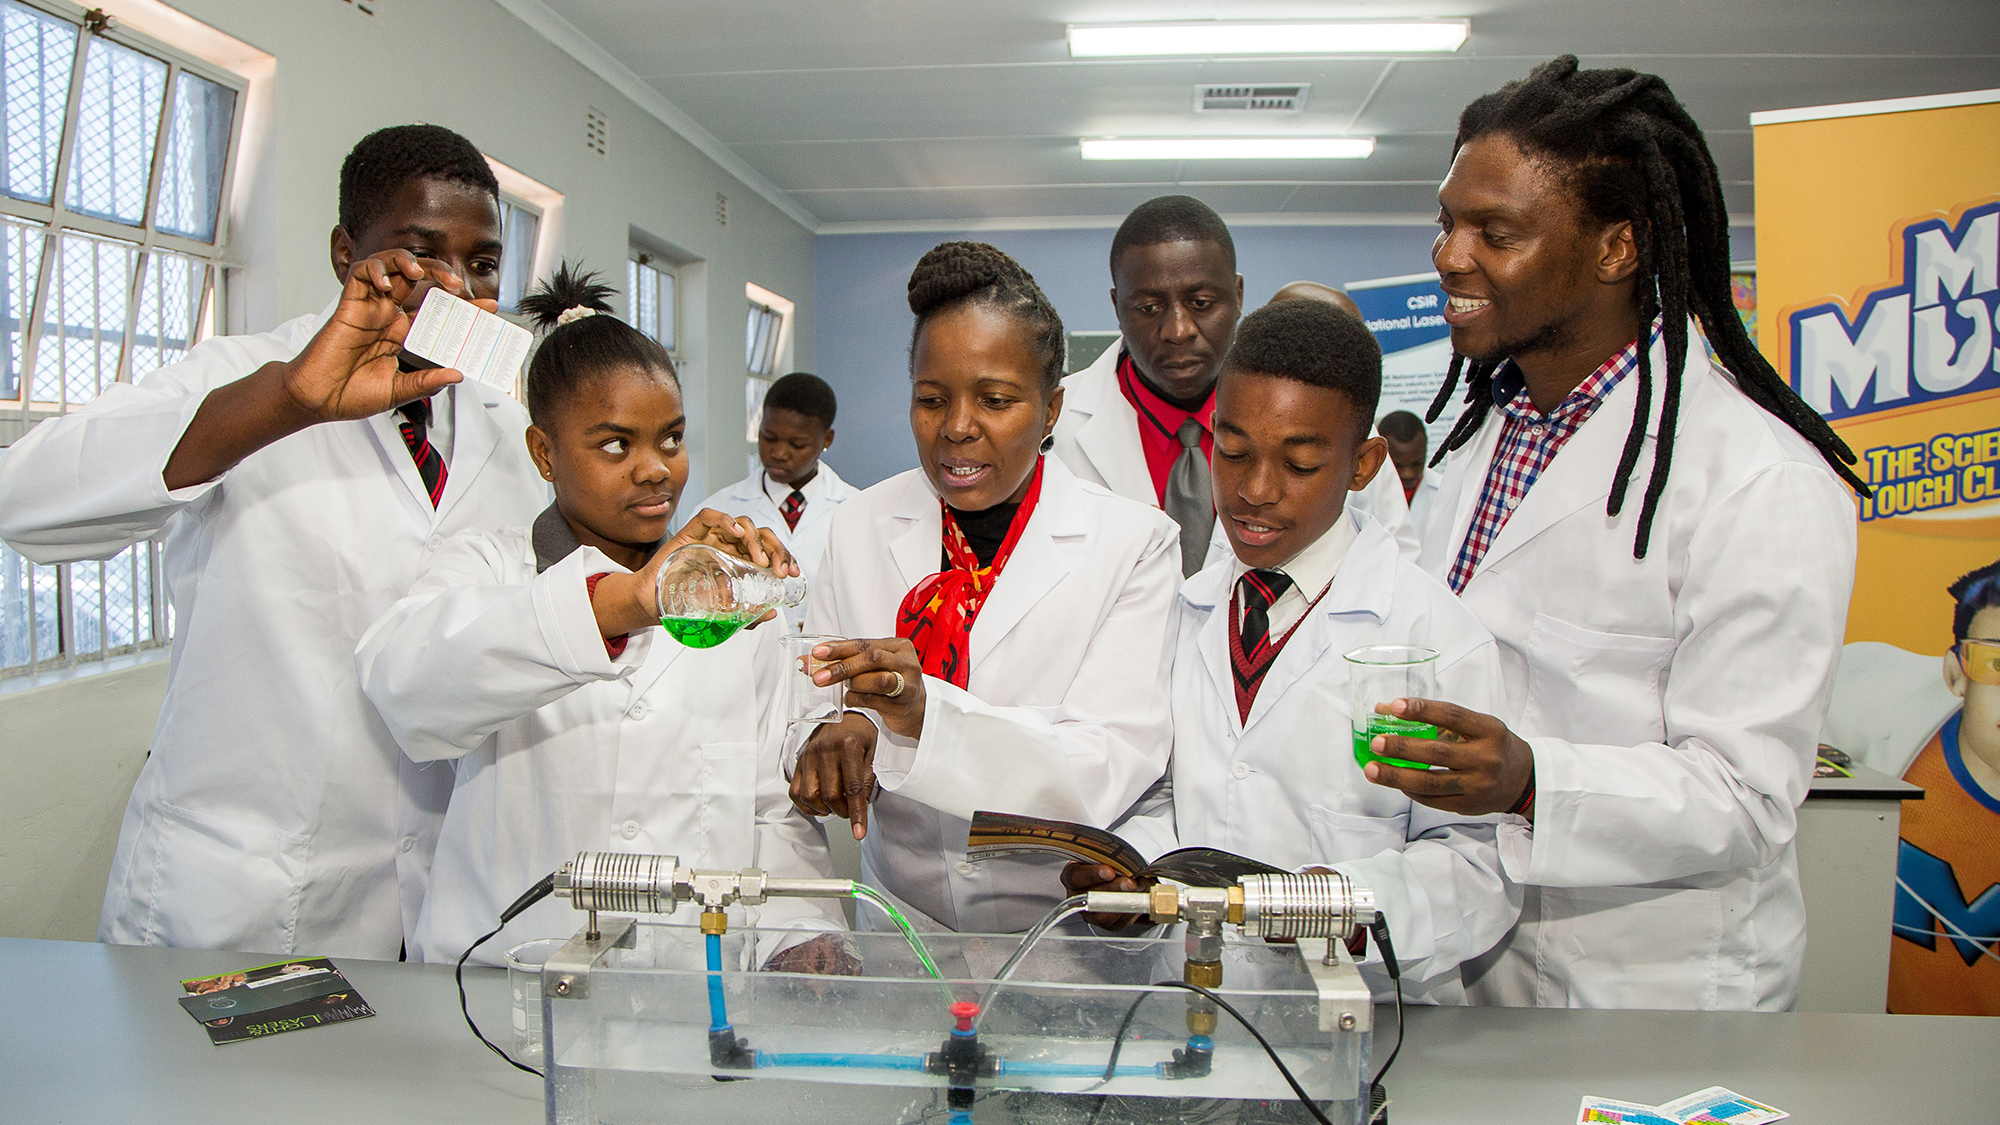 SC Johnson donates a science lab in South Africa as part of our corporate giving program